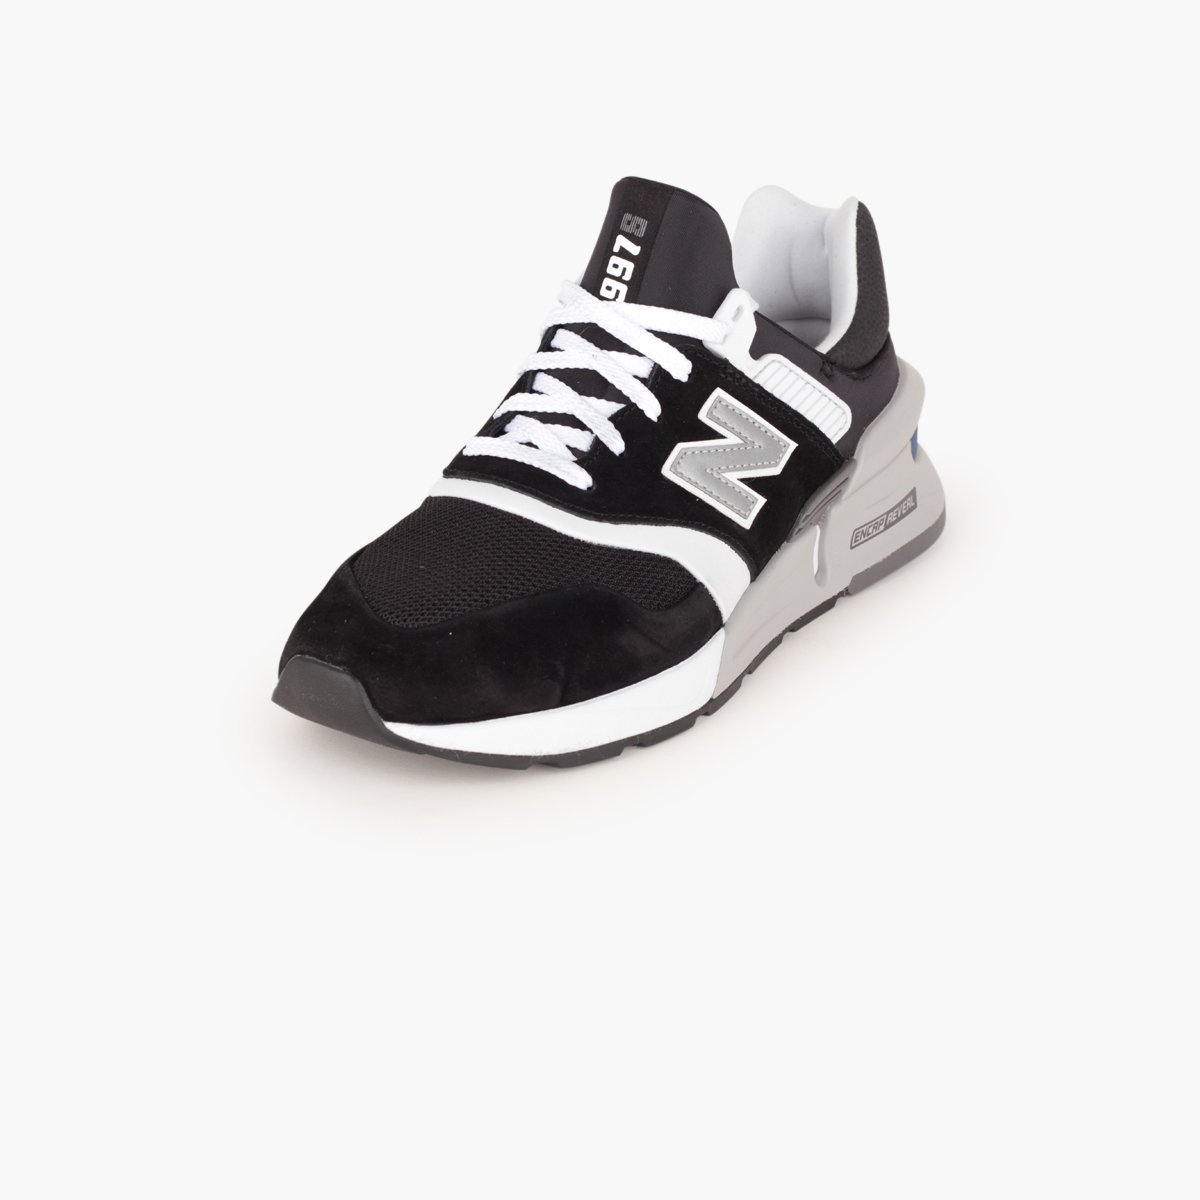 New Balance MS997HGA-SUEDE Store